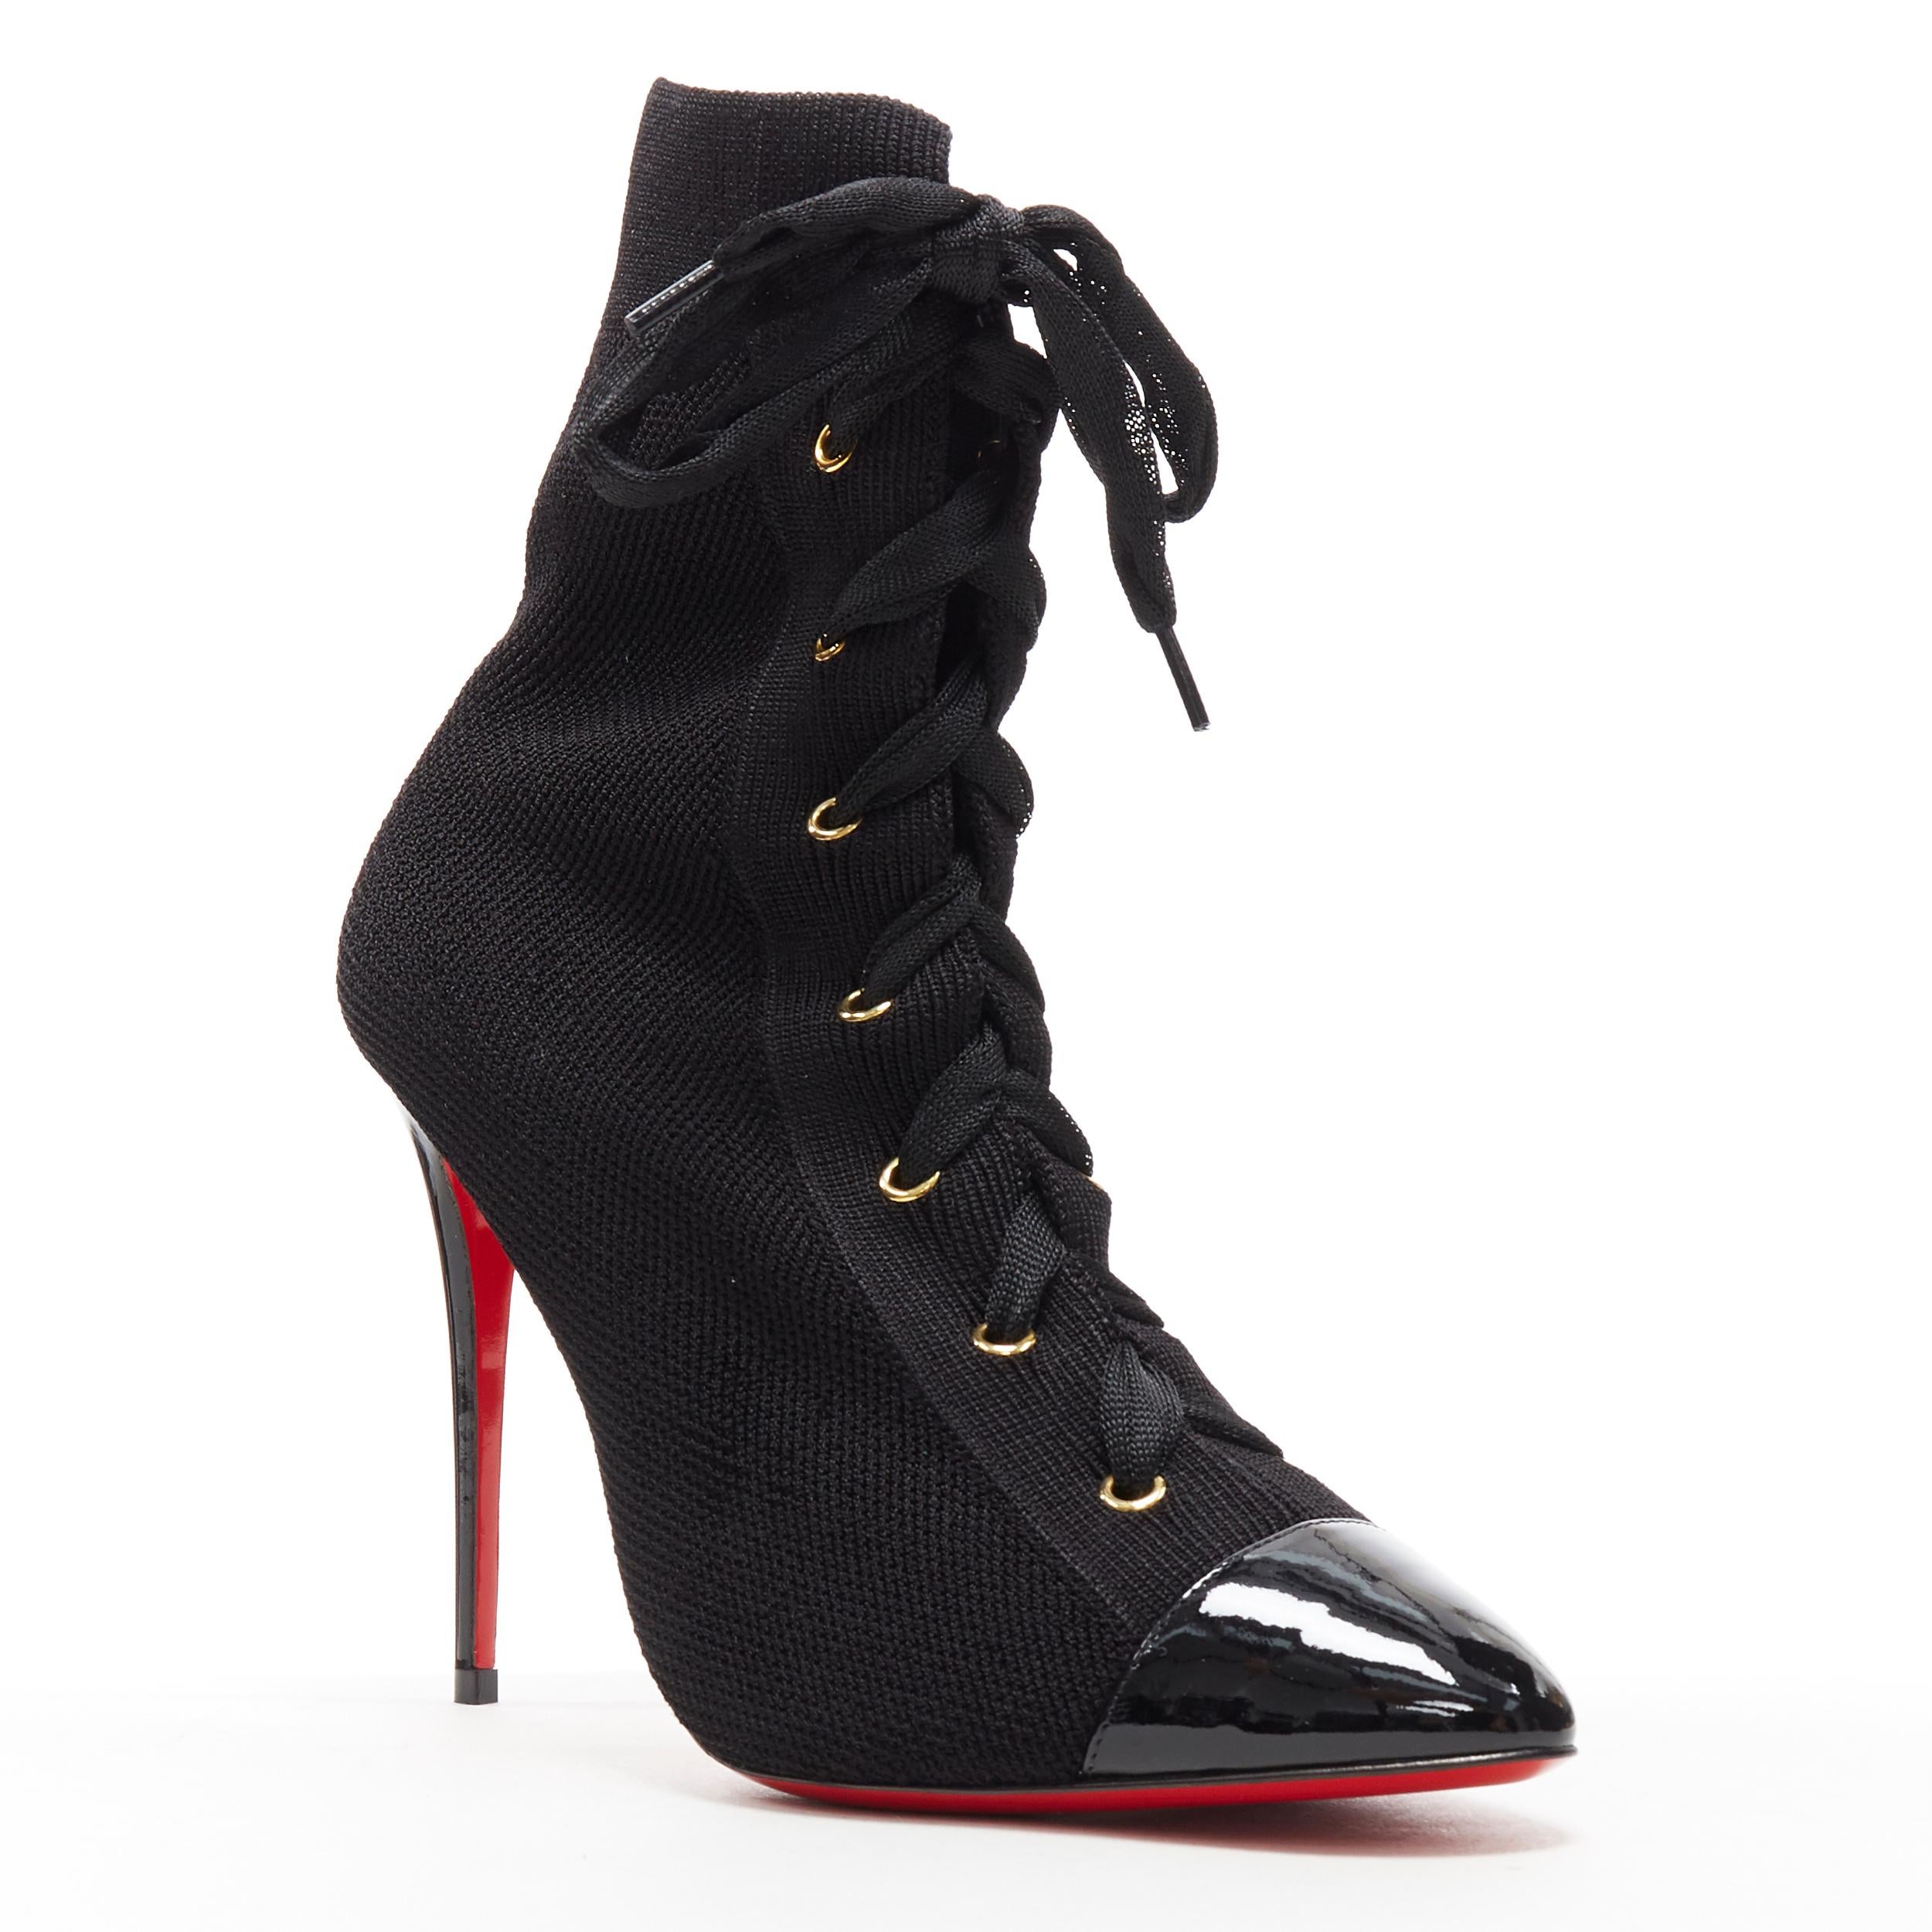 new CHRISTIAN LOUBOUTIN Frenchie 100 black lace up stretch knit sock boot EU37.5
Brand: Christian Louboutin
Designer: Christian Louboutin
Model Name / Style: Frenchie 100
Material: Fabric
Color: Black
Pattern: Solid
Closure: Lace up
Extra Detail: